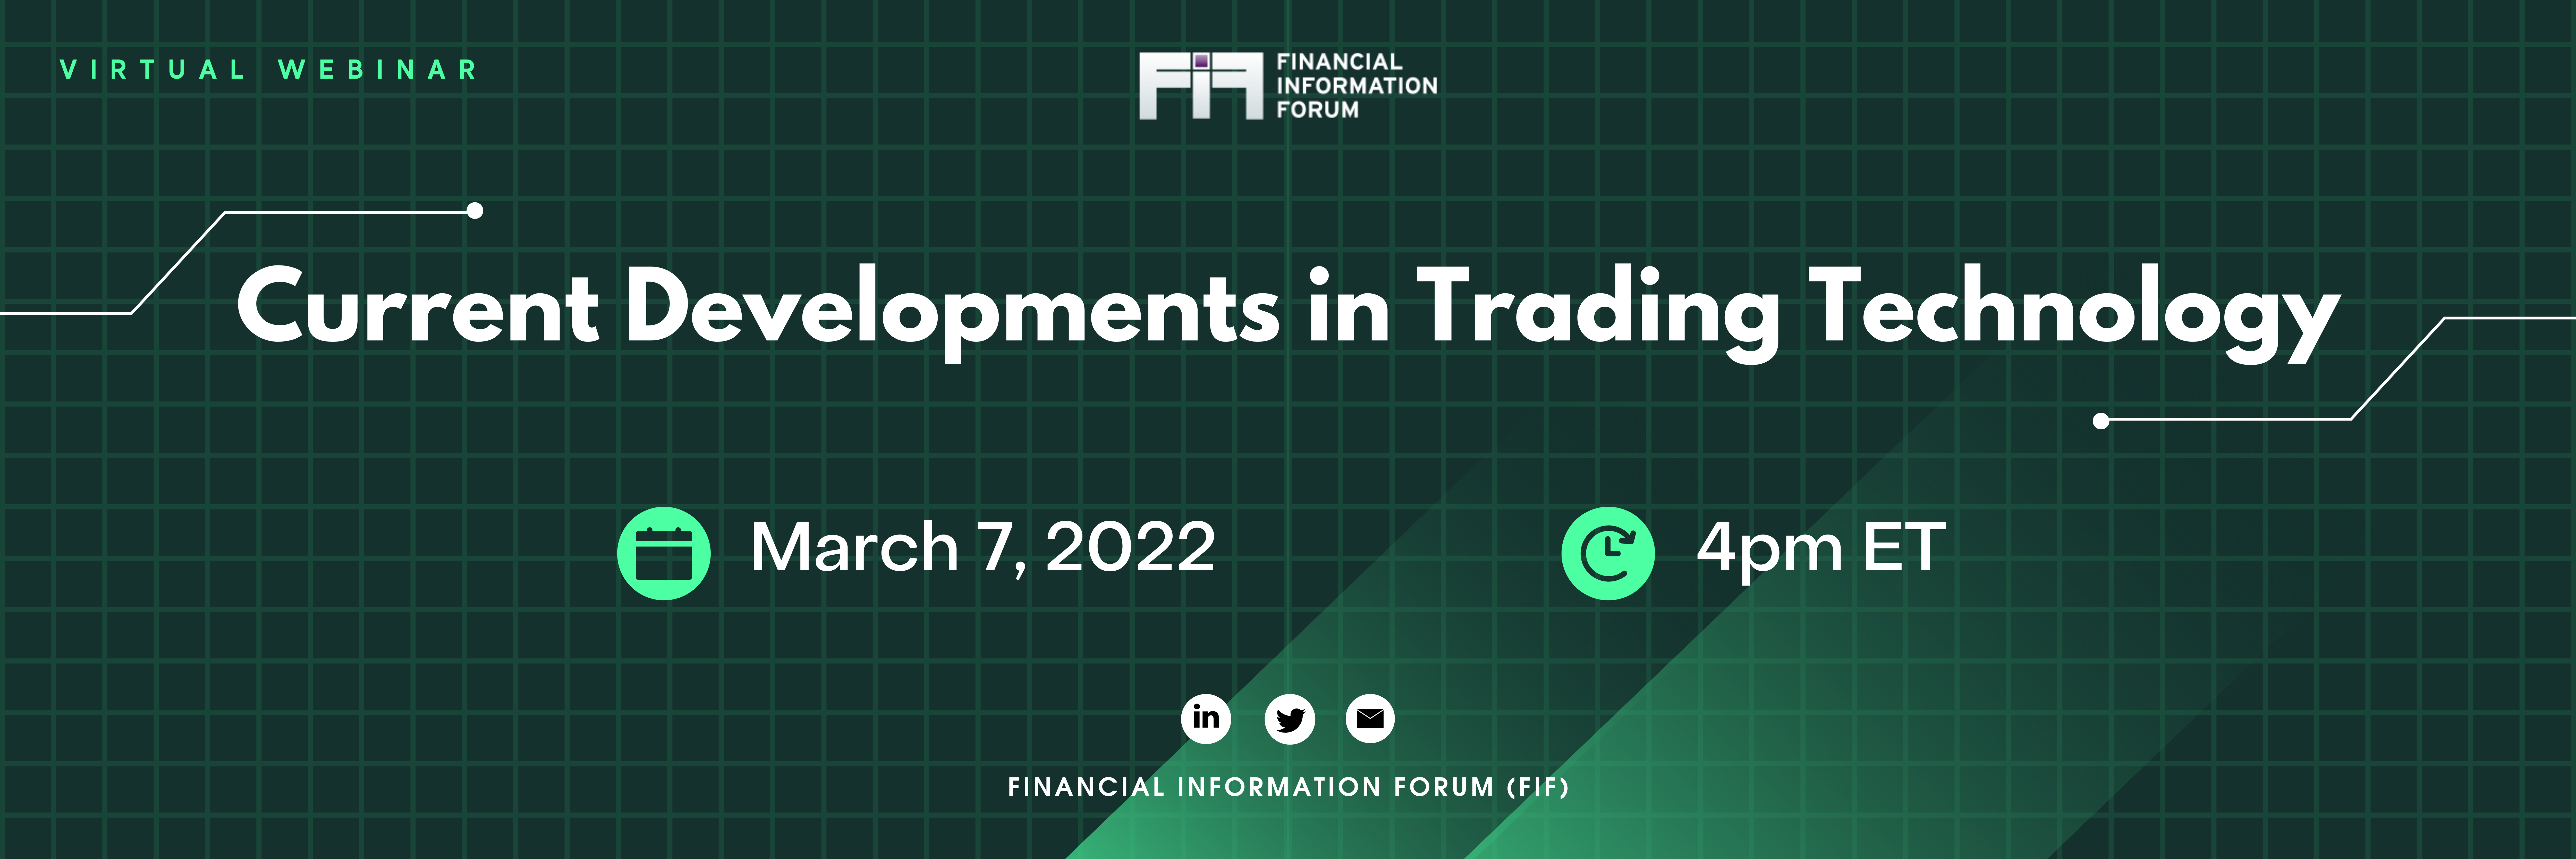 Current Developments in Trading Technology Banner.png